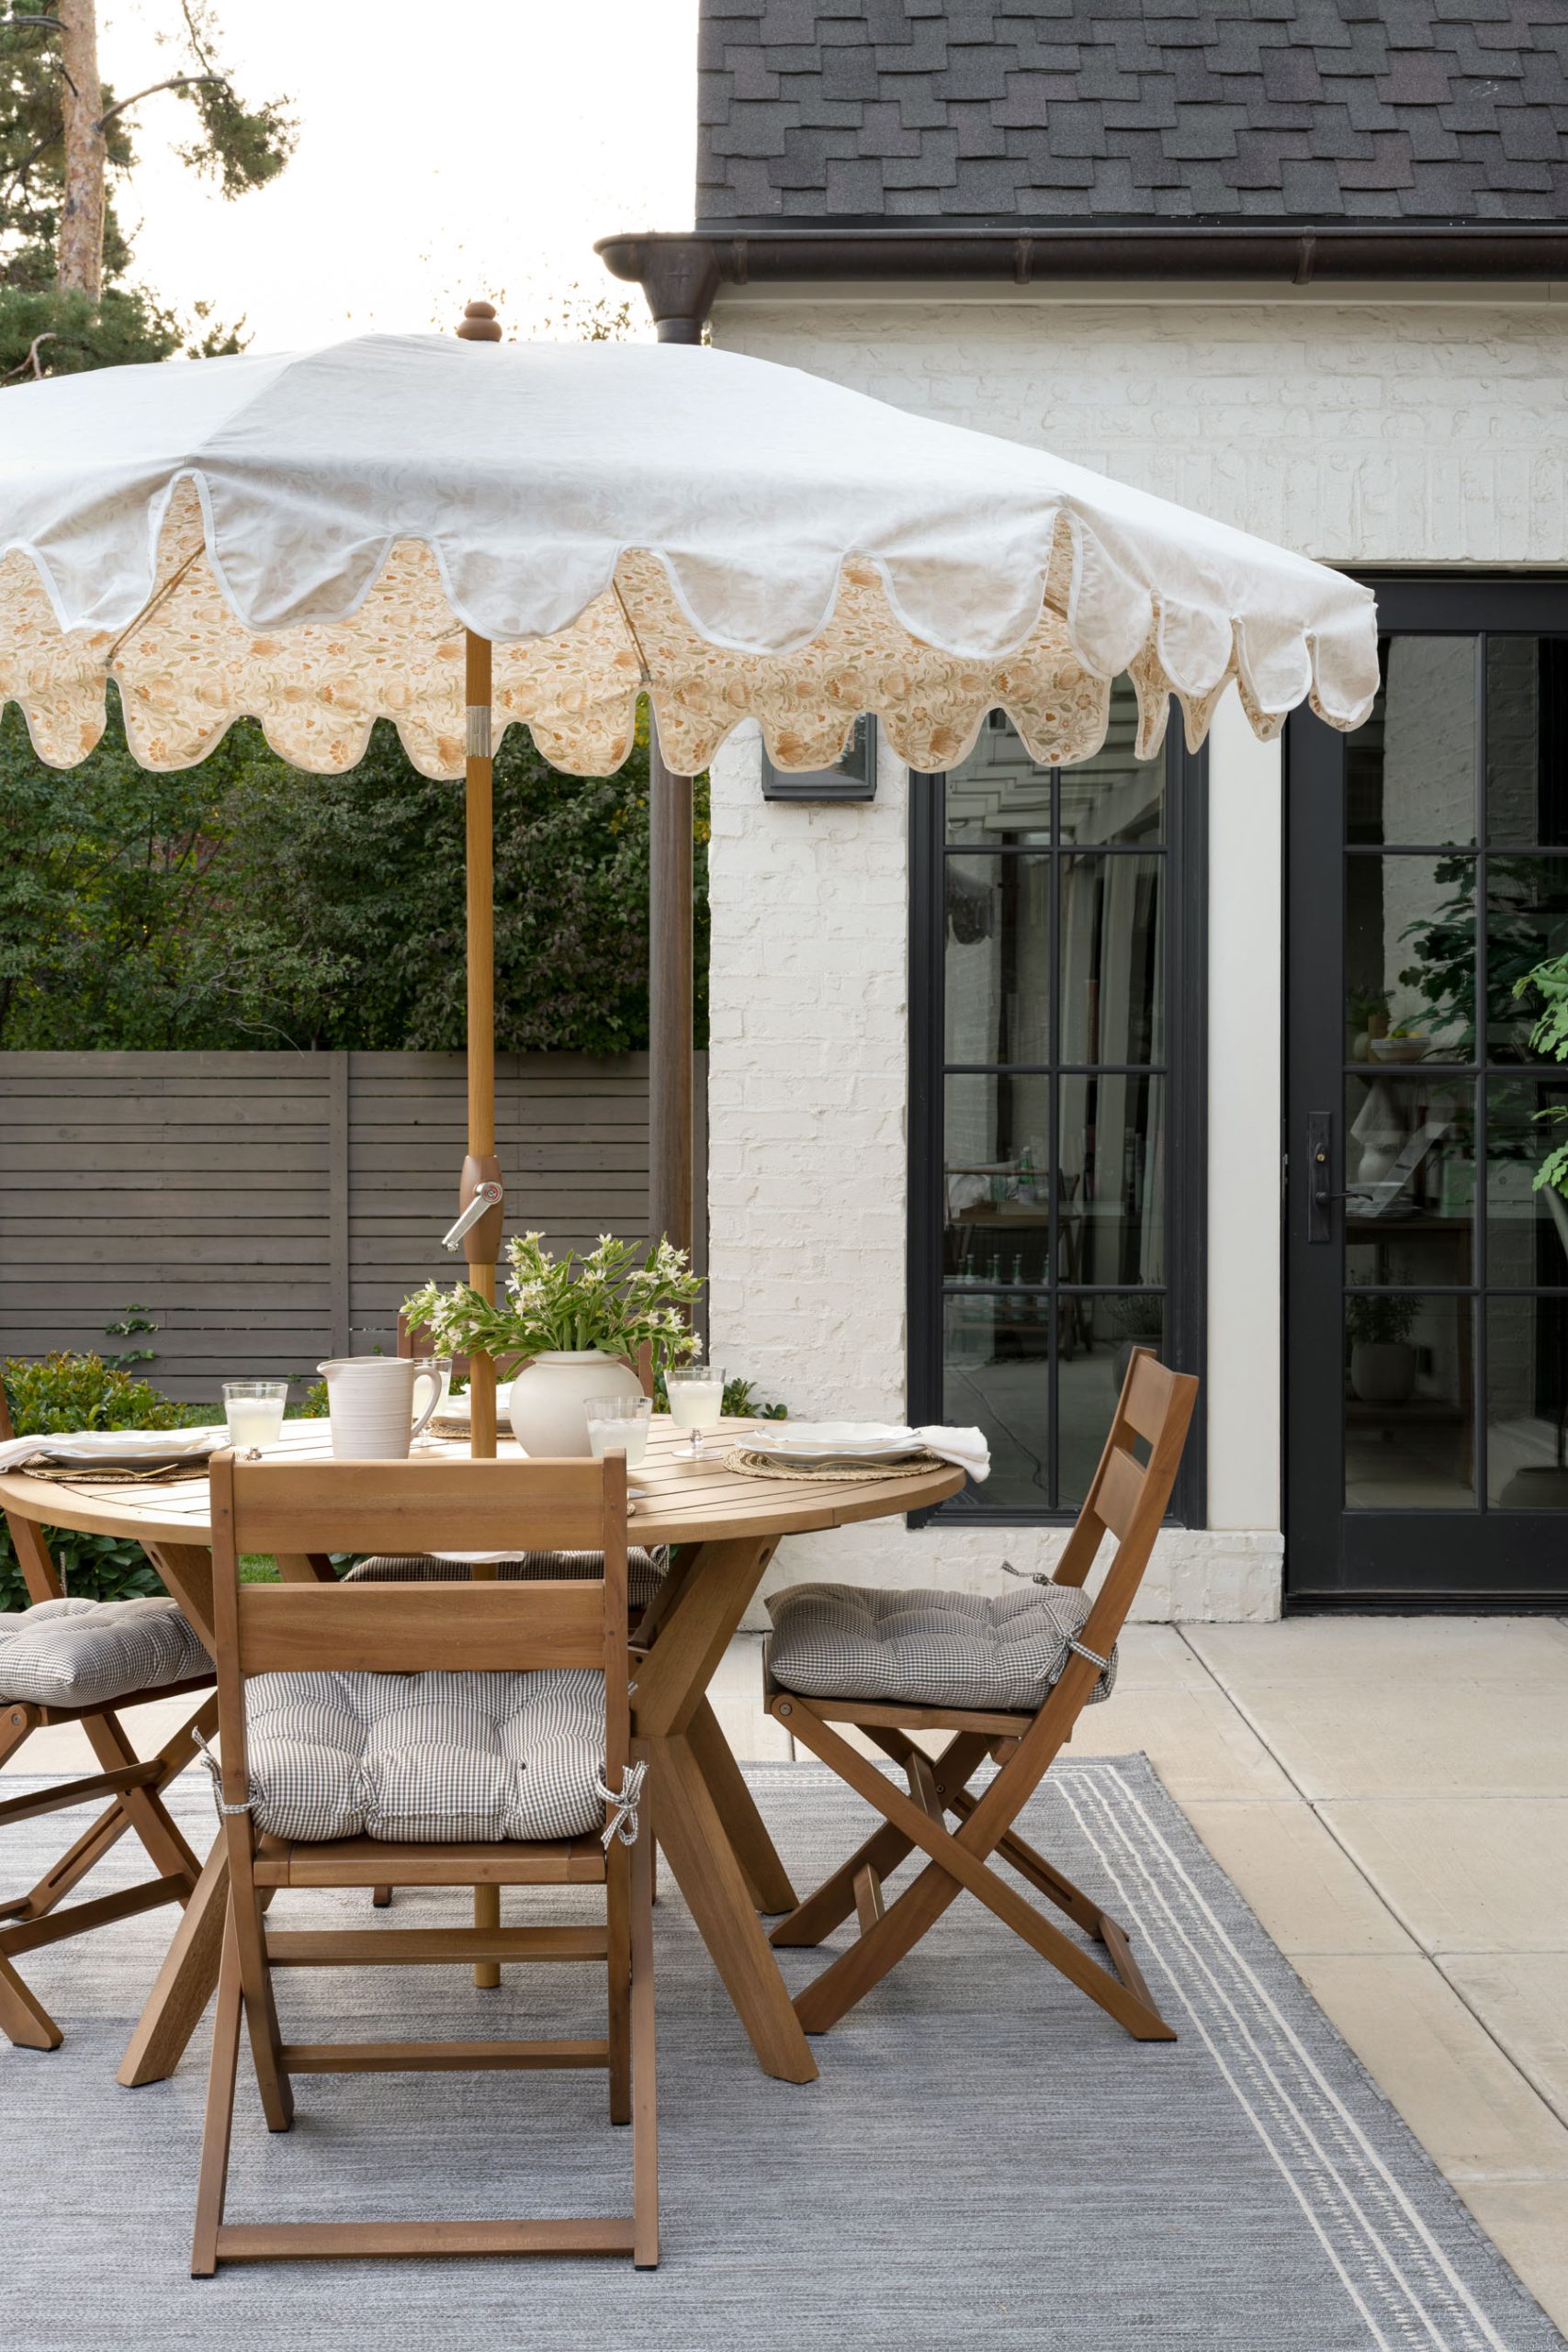 Outdoor dining table with folding chairs and umbrella